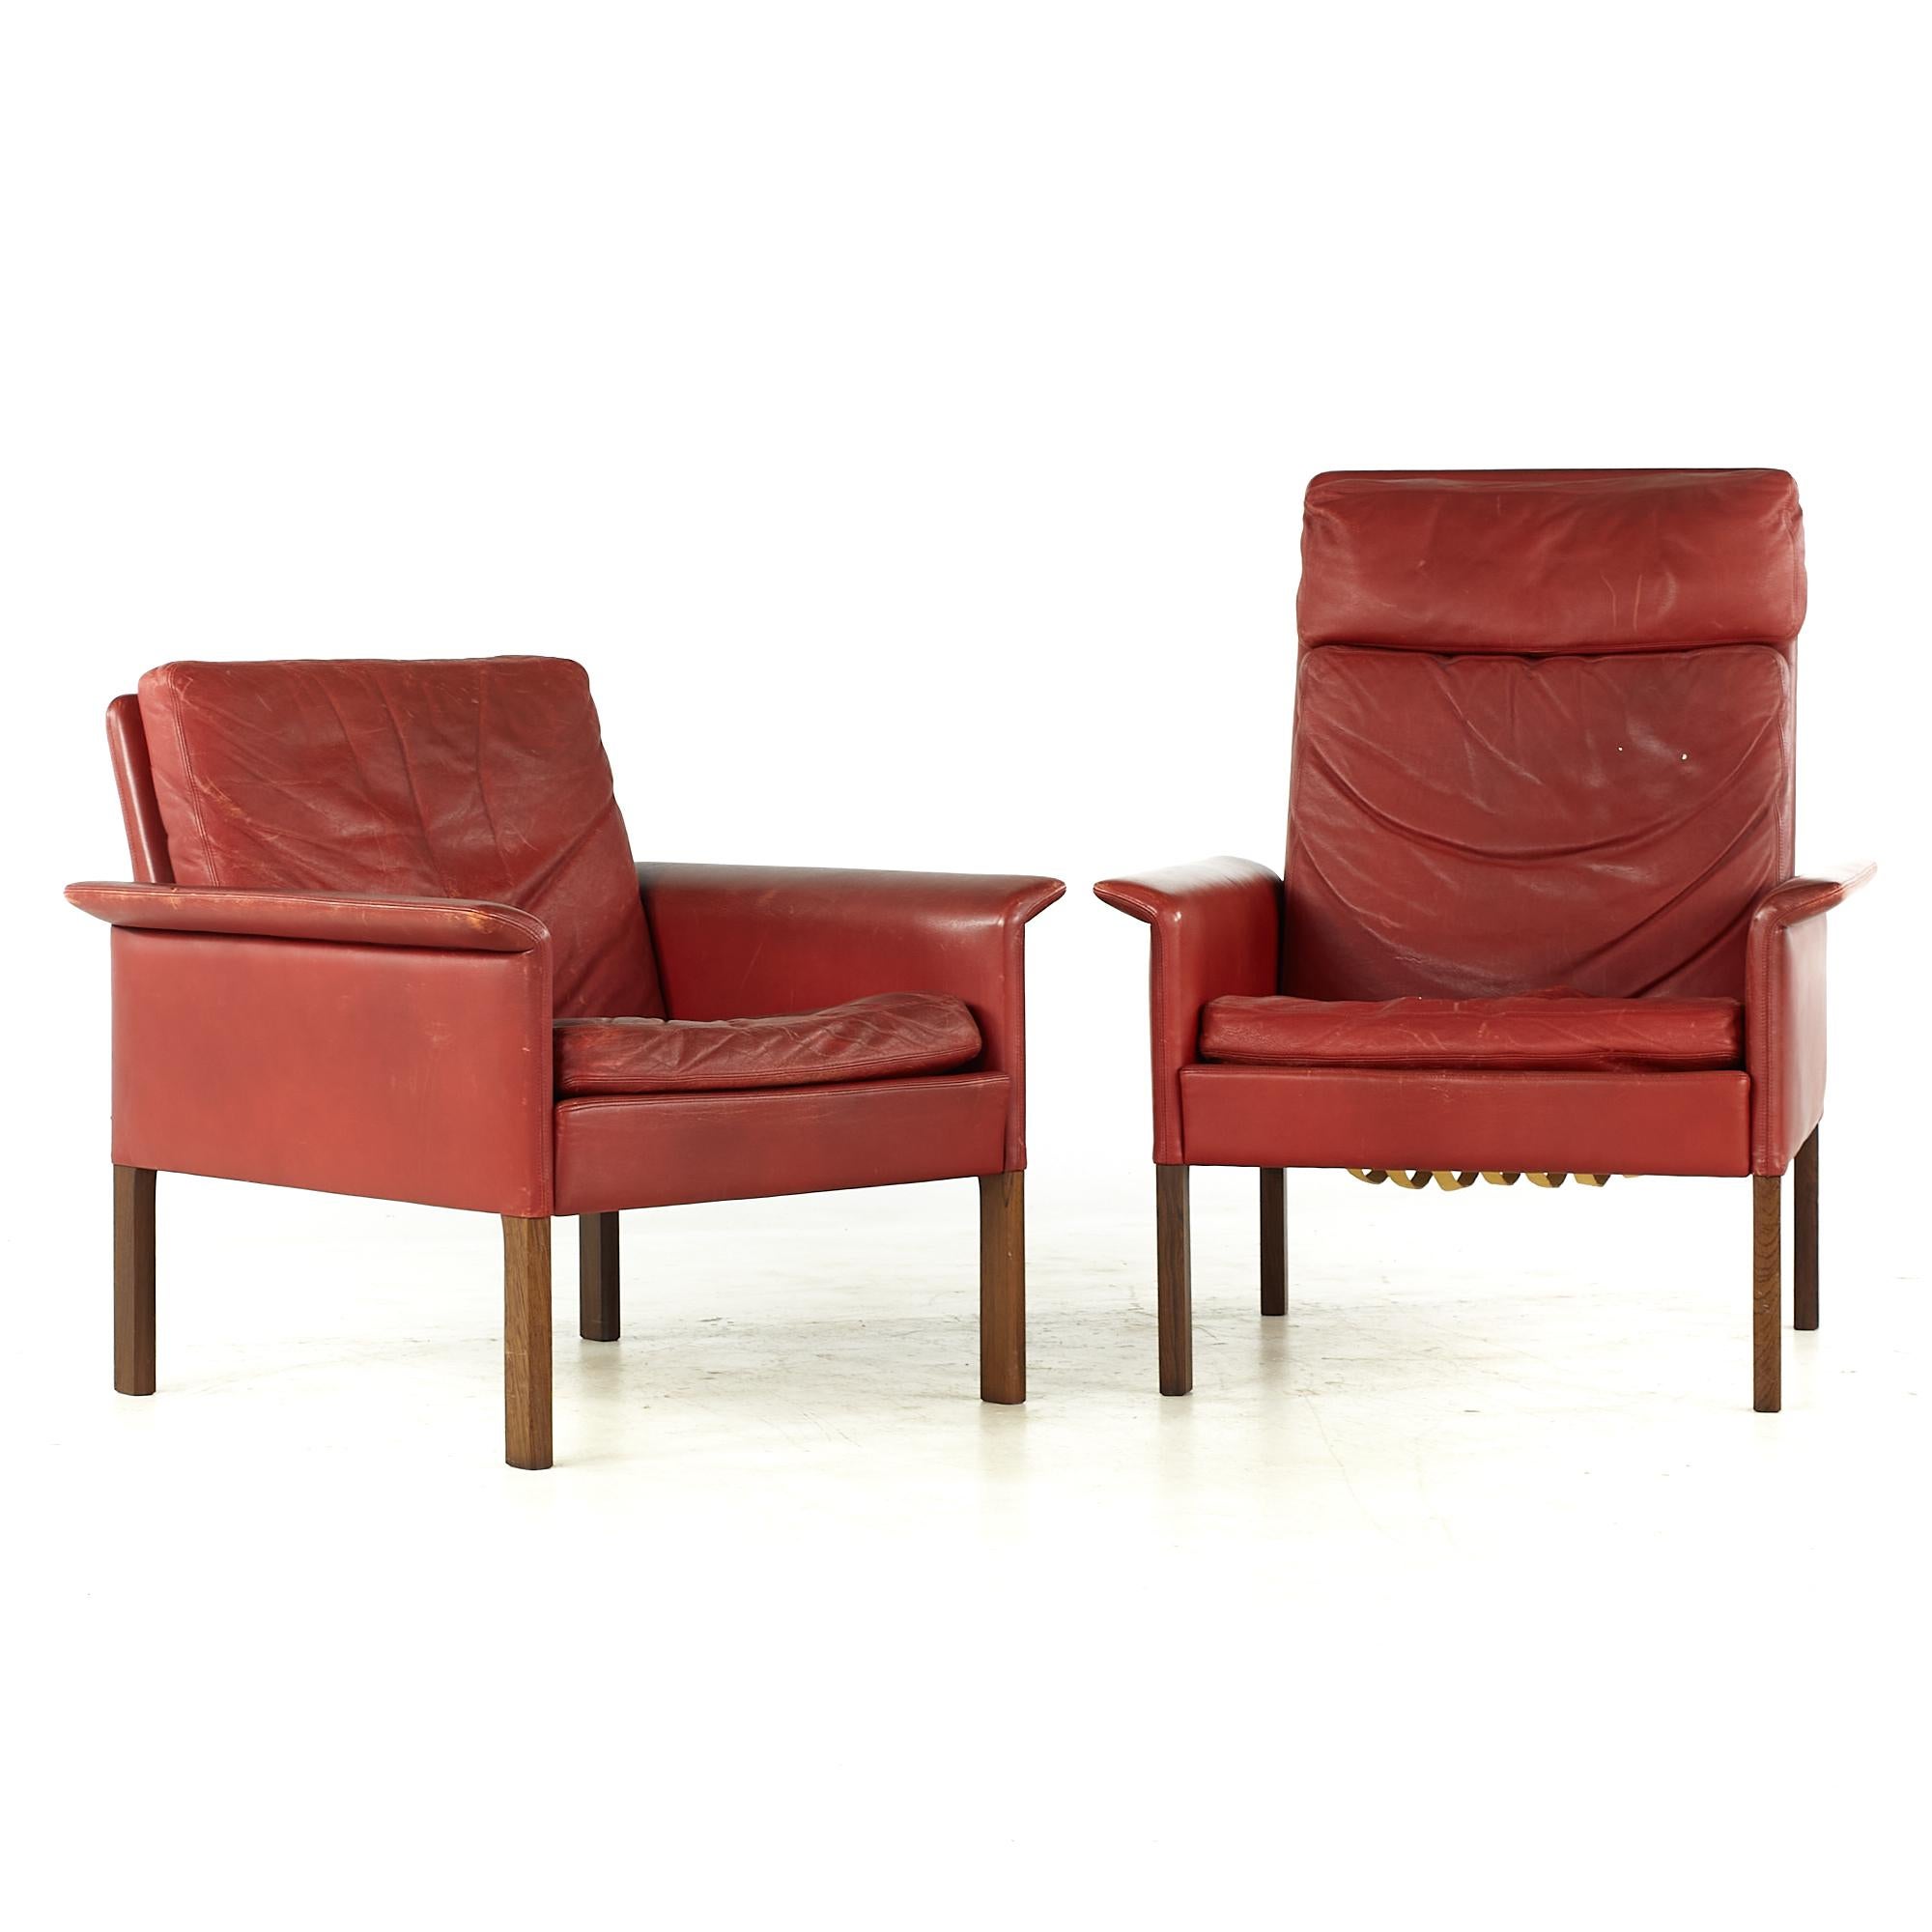 Hans Olsen midcentury Danish Rosewood and Red Leather Chairs - Pair

The His chair measures: 29.5 wide x 28 deep x 38 inches high
The Hers chair measures: 29.5 wide x 28 deep x 29 inches high
Both chairs have a seat height of 16 and an arm